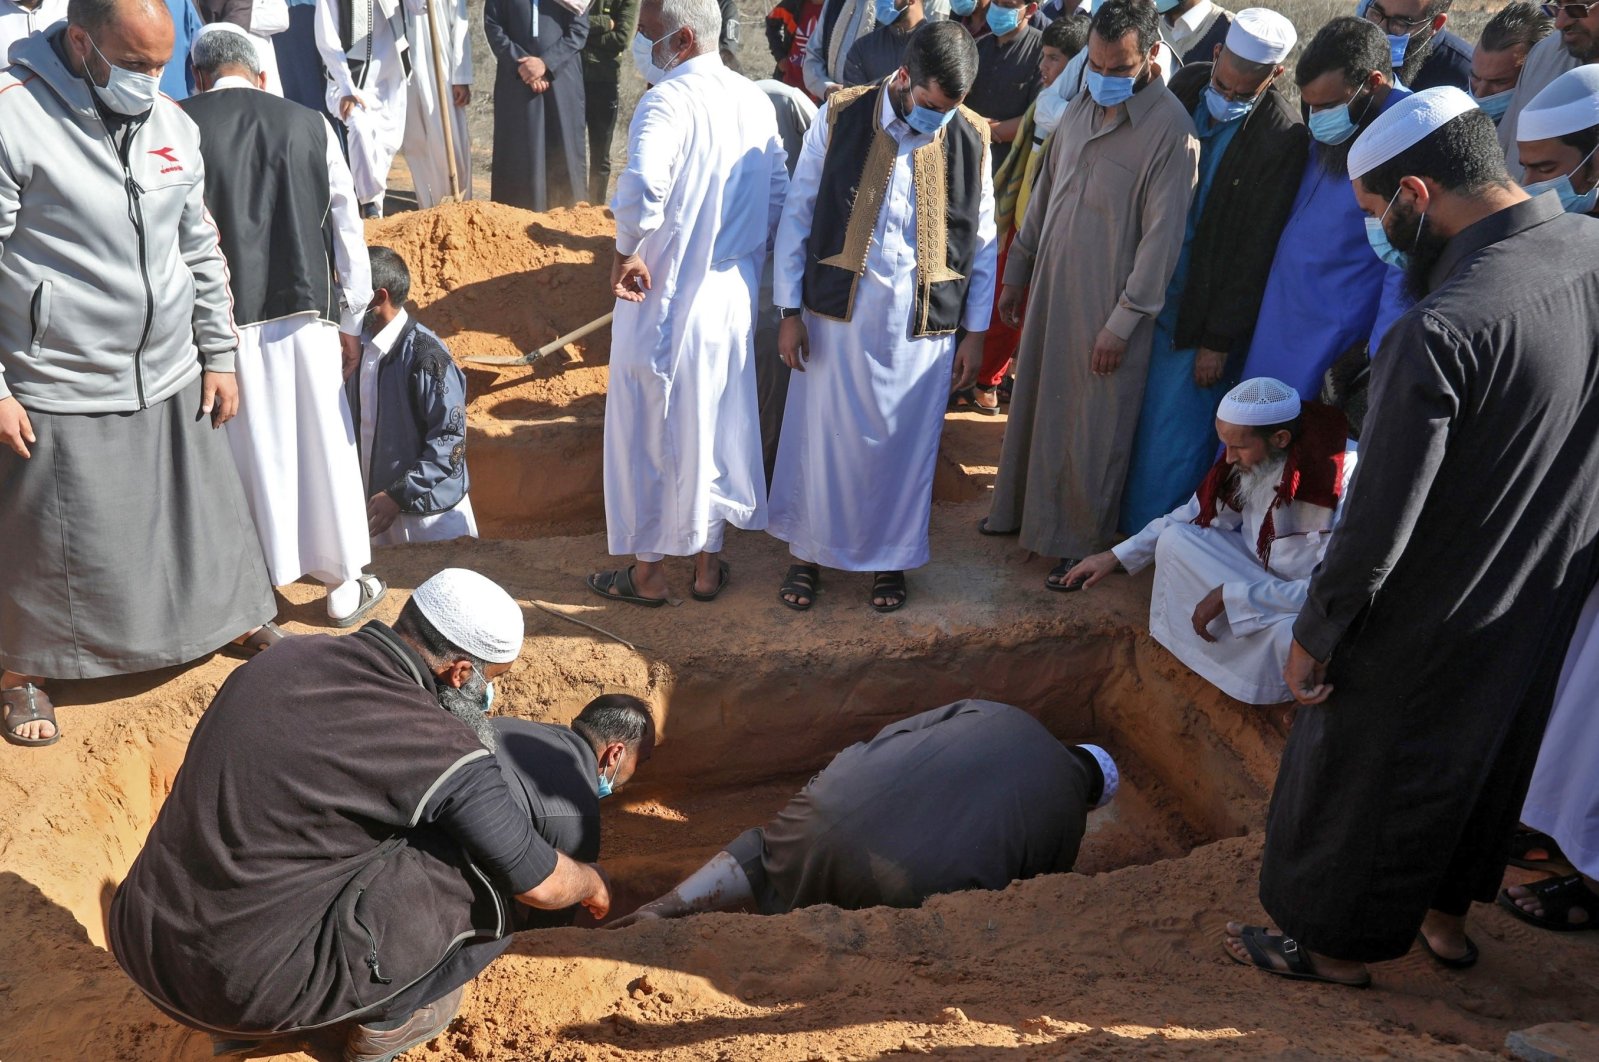 Libyan mourners bury a body unearthed from a mass grave, in a cemetery in the city of Tarhuna, Libya, Nov. 13, 2020. (AFP Photo)